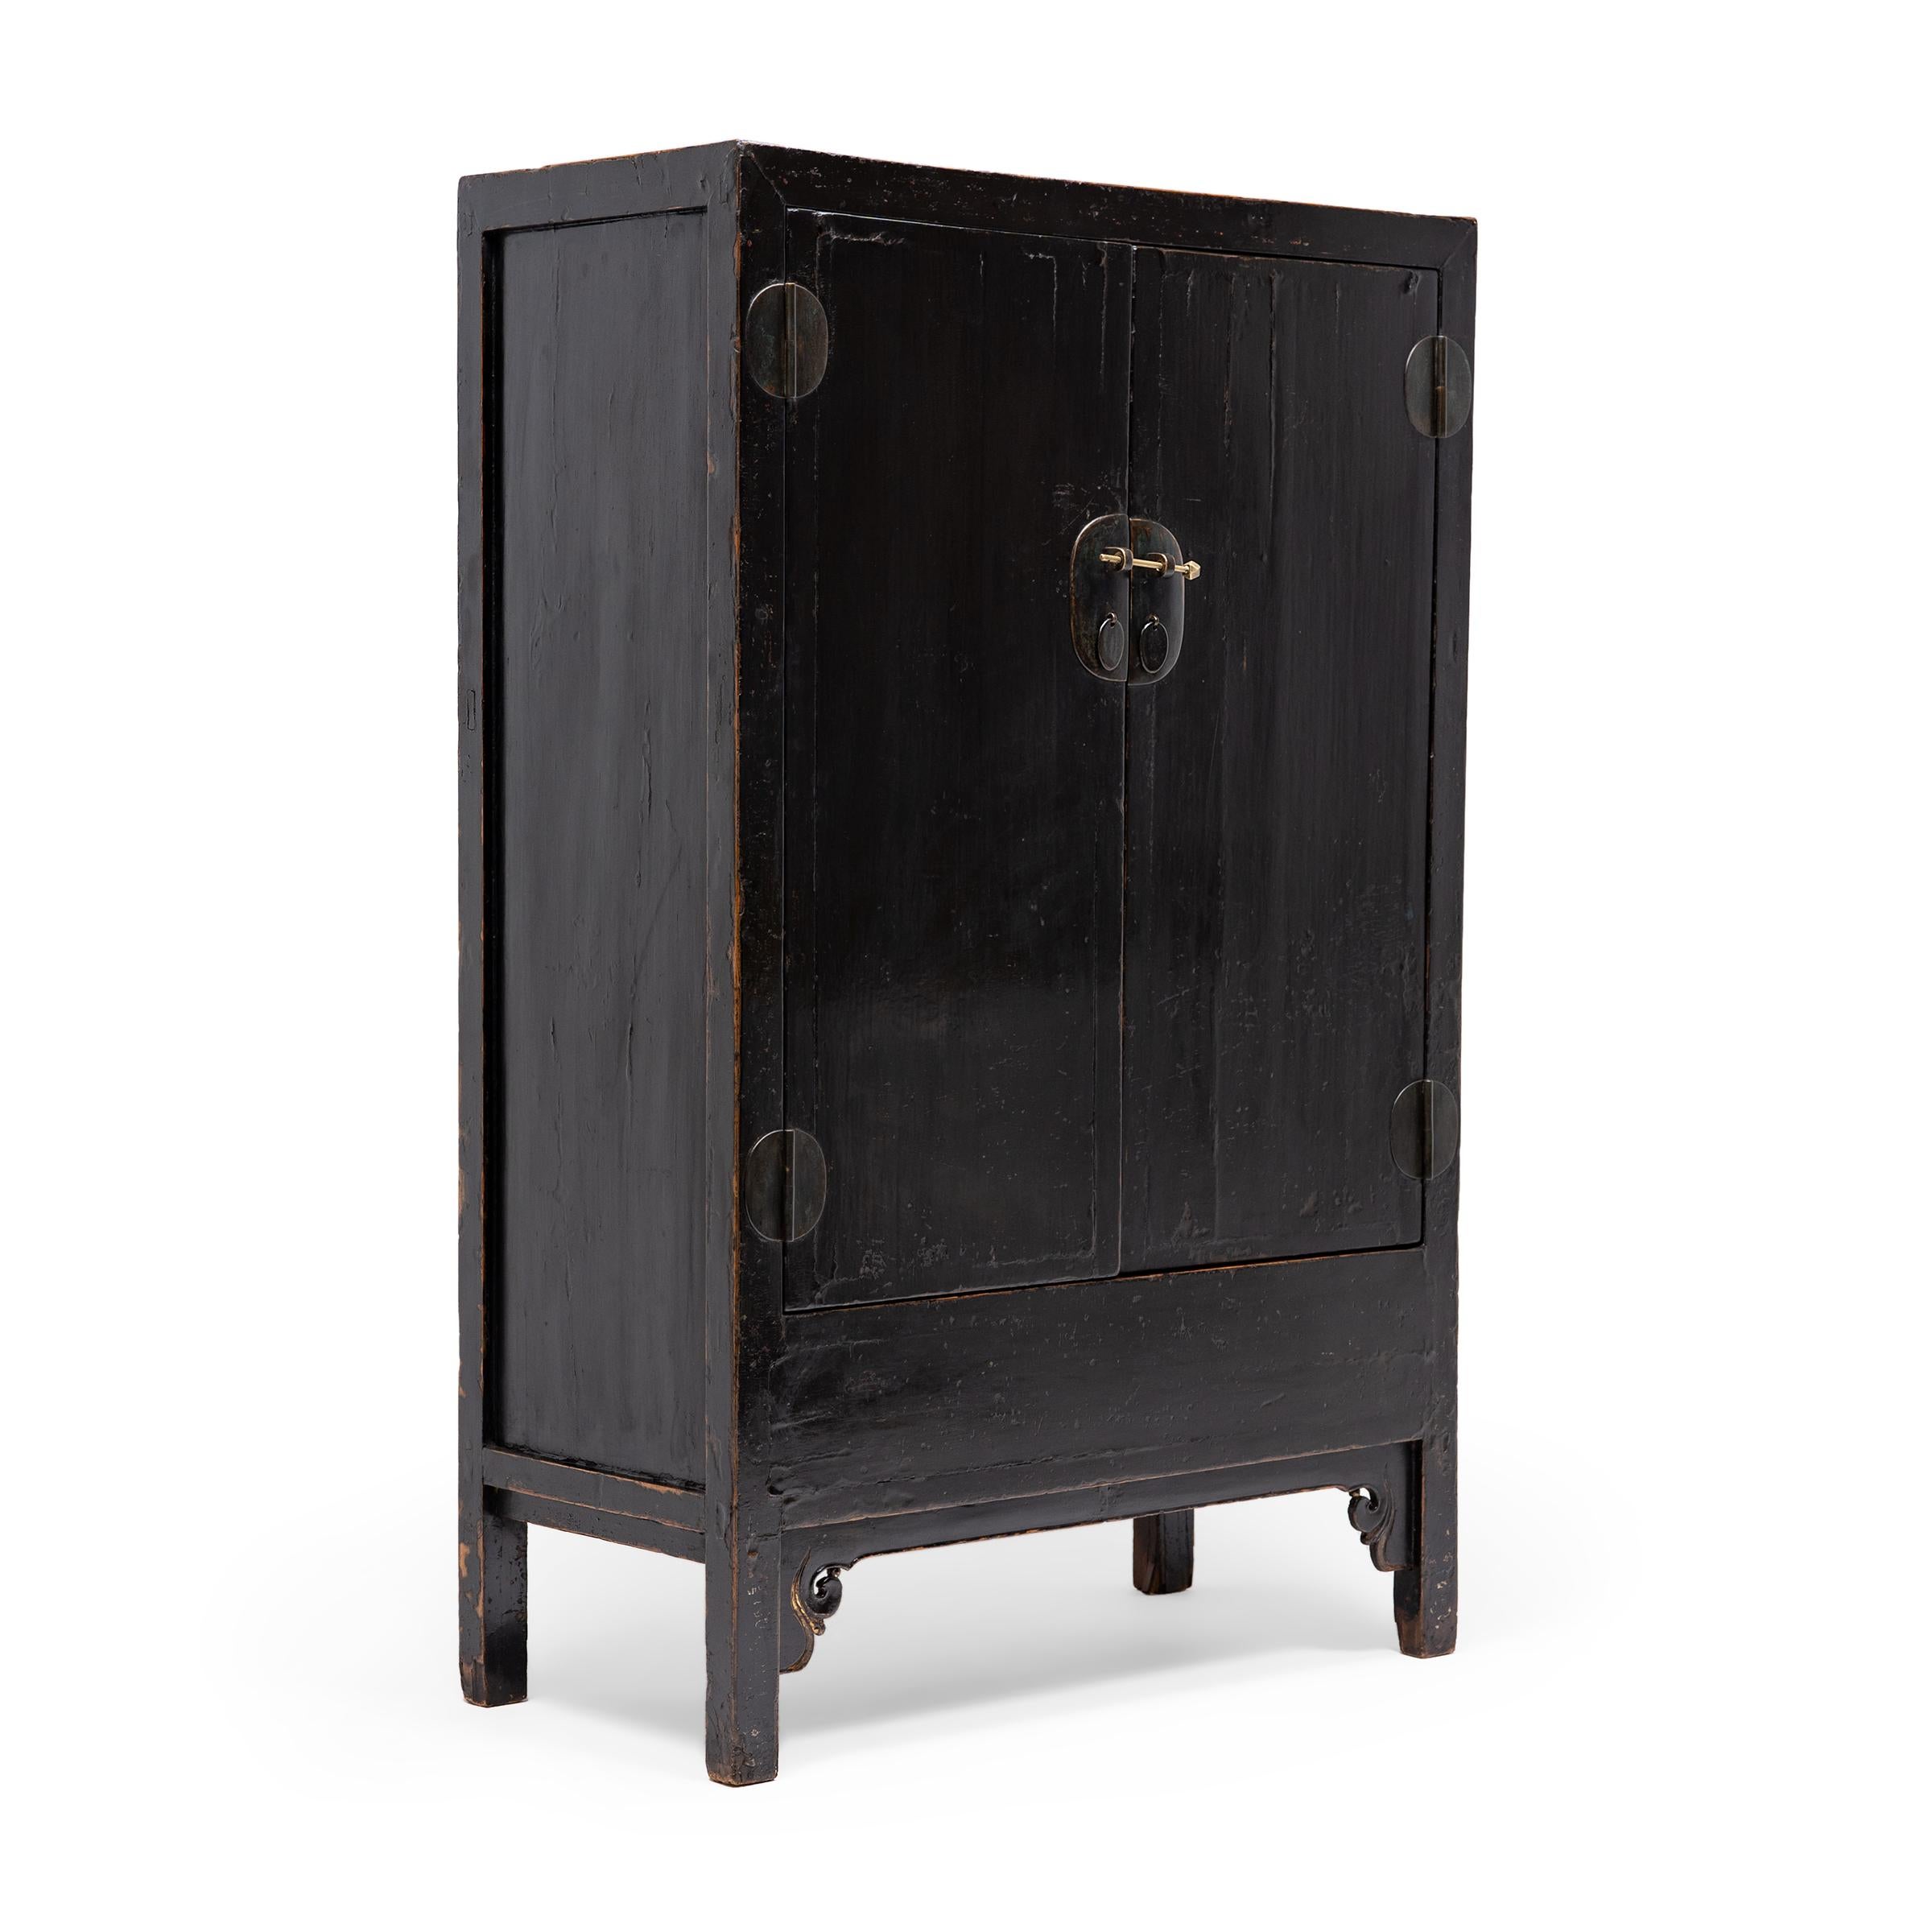 With clean lines and a darkly lacquered finish, this square corner cabinet celebrates the restraint of classic Chinese furniture forms. Dated to the mid-19th century, the tall cabinet is crafted of elmwood with traditional mortise-and-tenon joinery